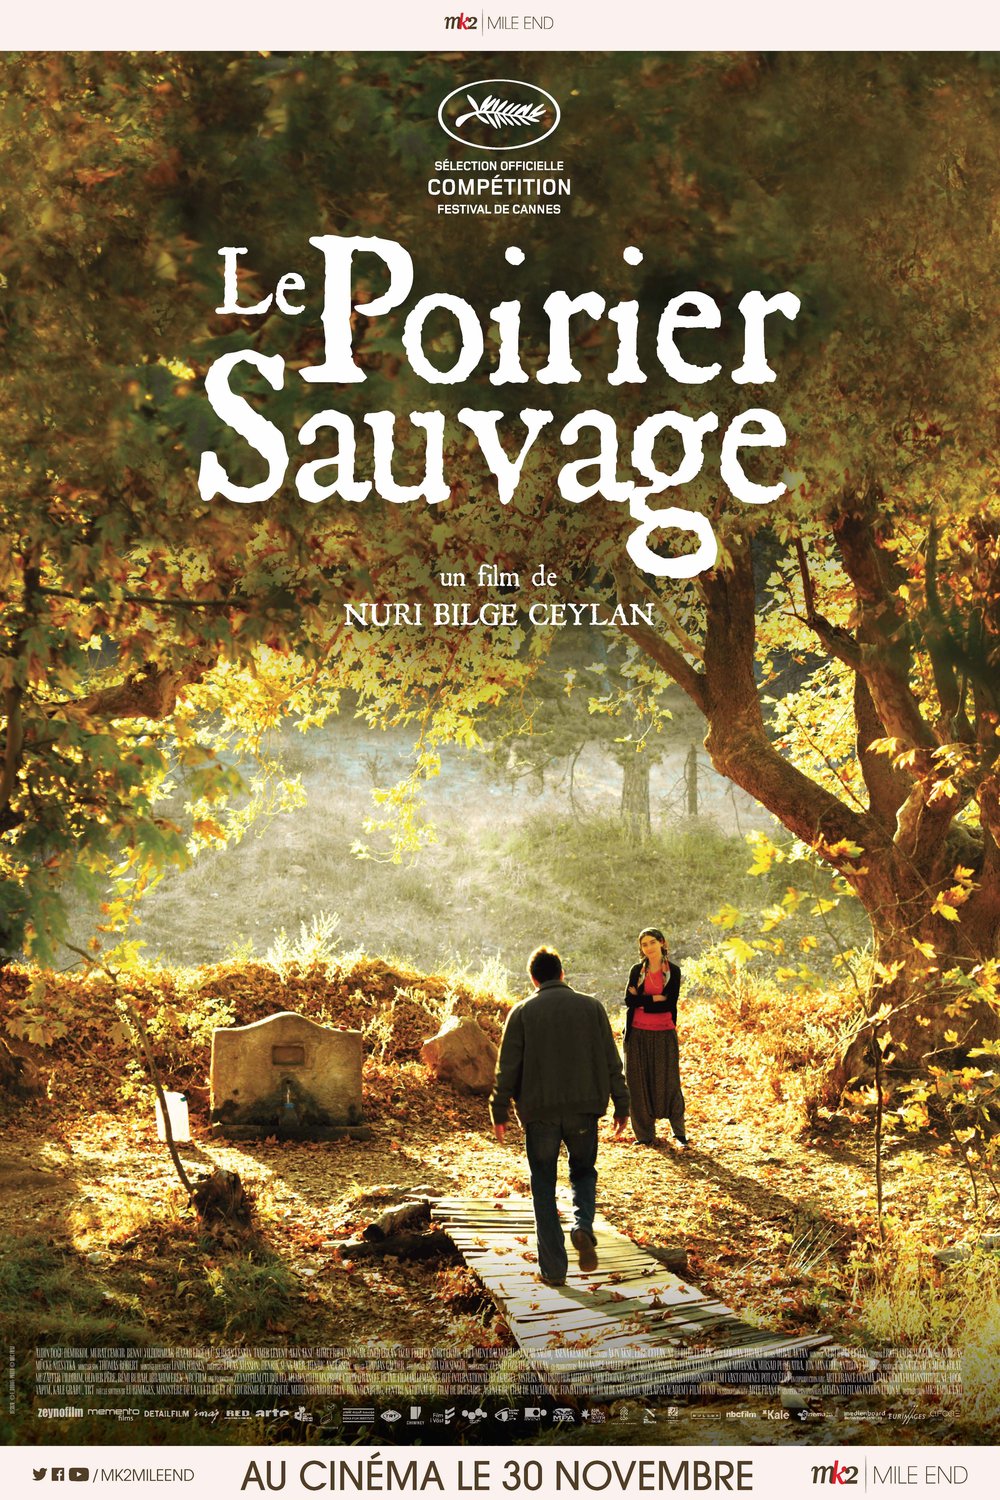 Poster of the movie Le Poirier sauvage